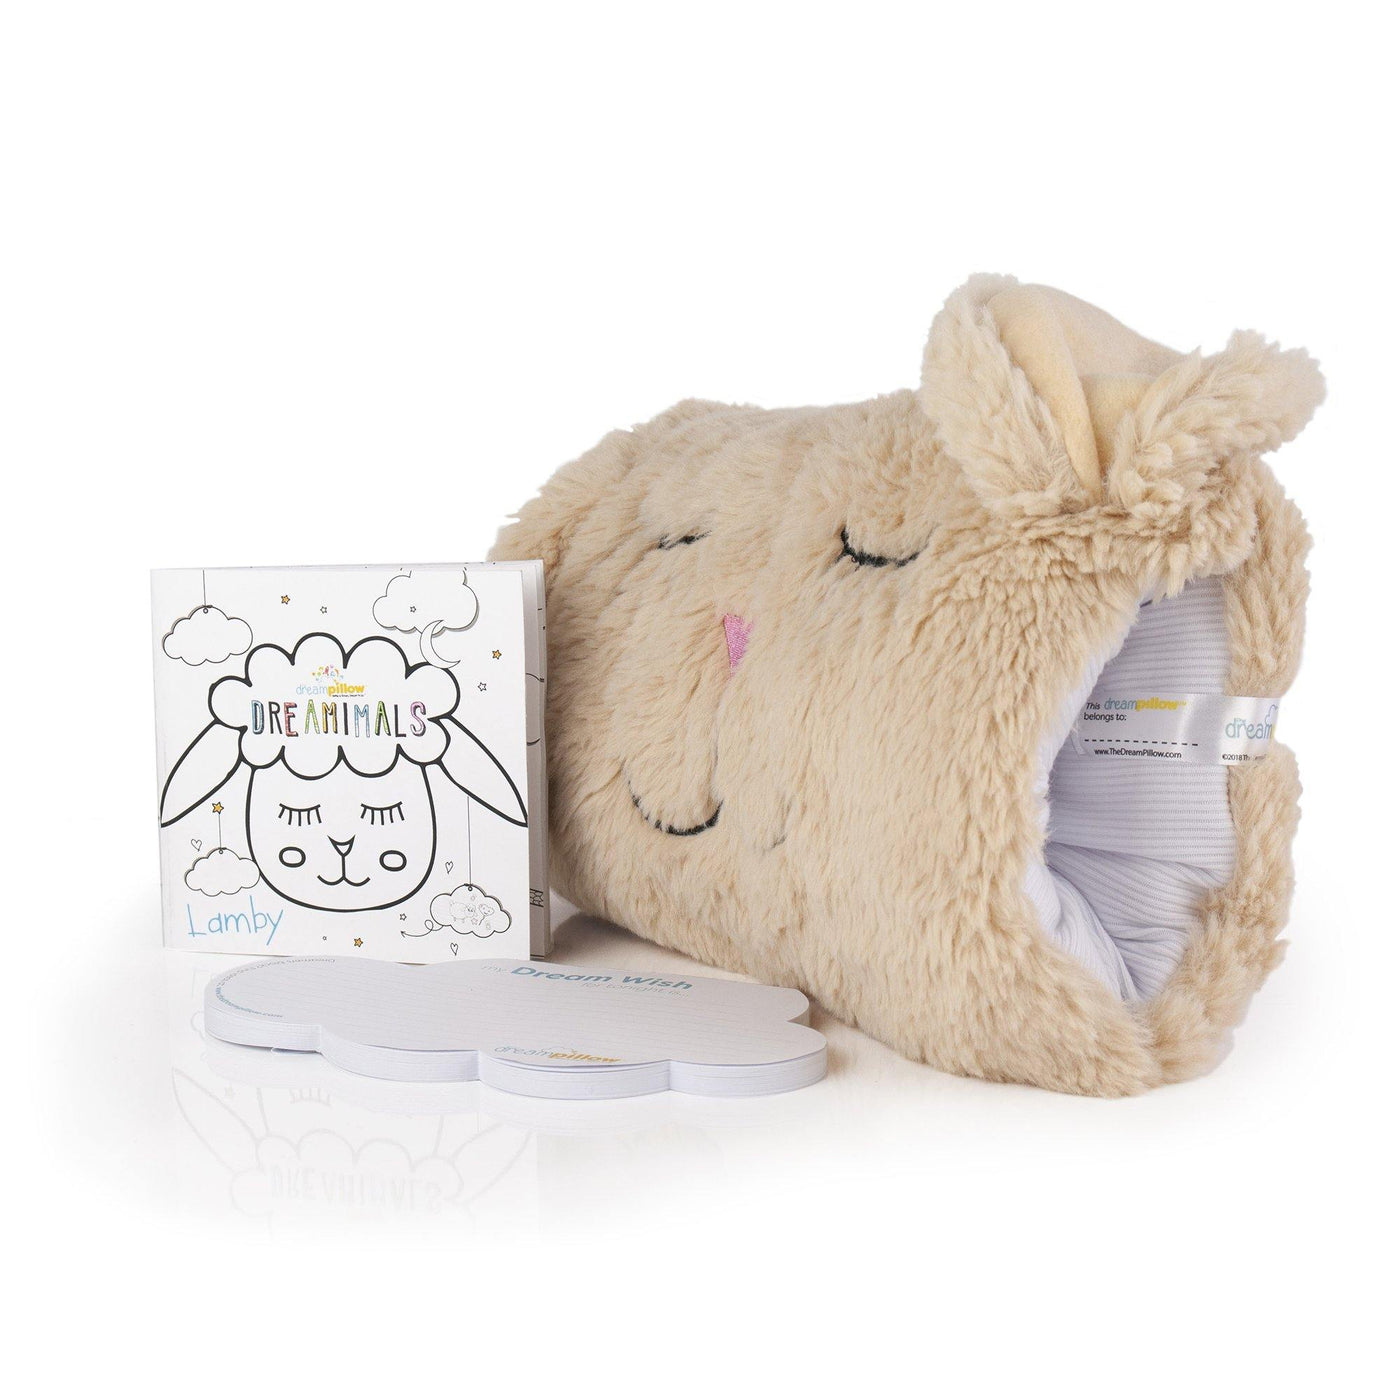 Dreamimals Lamby Dream Pillow | Fruit of the Vine Boutique 